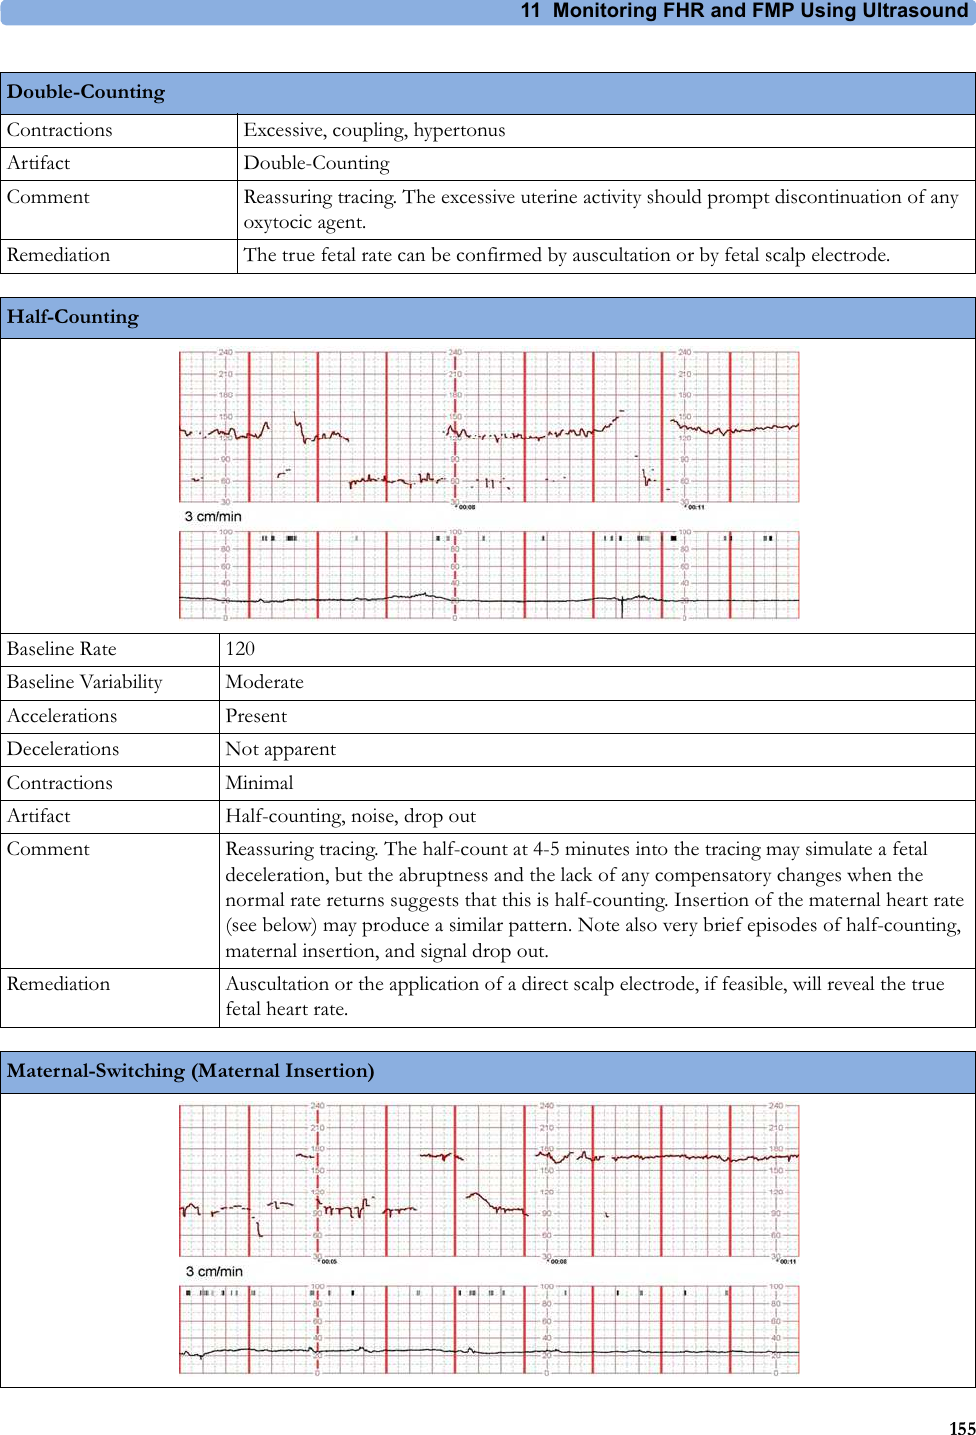 11  Monitoring FHR and FMP Using Ultrasound155Contractions Excessive, coupling, hypertonusArtifact Double-CountingComment Reassuring tracing. The excessive uterine activity should prompt discontinuation of any oxytocic agent.Remediation The true fetal rate can be confirmed by auscultation or by fetal scalp electrode.Double-CountingHalf-CountingBaseline Rate 120Baseline Variability ModerateAccelerations PresentDecelerations Not apparentContractions MinimalArtifact Half-counting, noise, drop outComment Reassuring tracing. The half-count at 4-5 minutes into the tracing may simulate a fetal deceleration, but the abruptness and the lack of any compensatory changes when the normal rate returns suggests that this is half-counting. Insertion of the maternal heart rate (see below) may produce a similar pattern. Note also very brief episodes of half-counting, maternal insertion, and signal drop out.Remediation Auscultation or the application of a direct scalp electrode, if feasible, will reveal the true fetal heart rate.Maternal-Switching (Maternal Insertion)